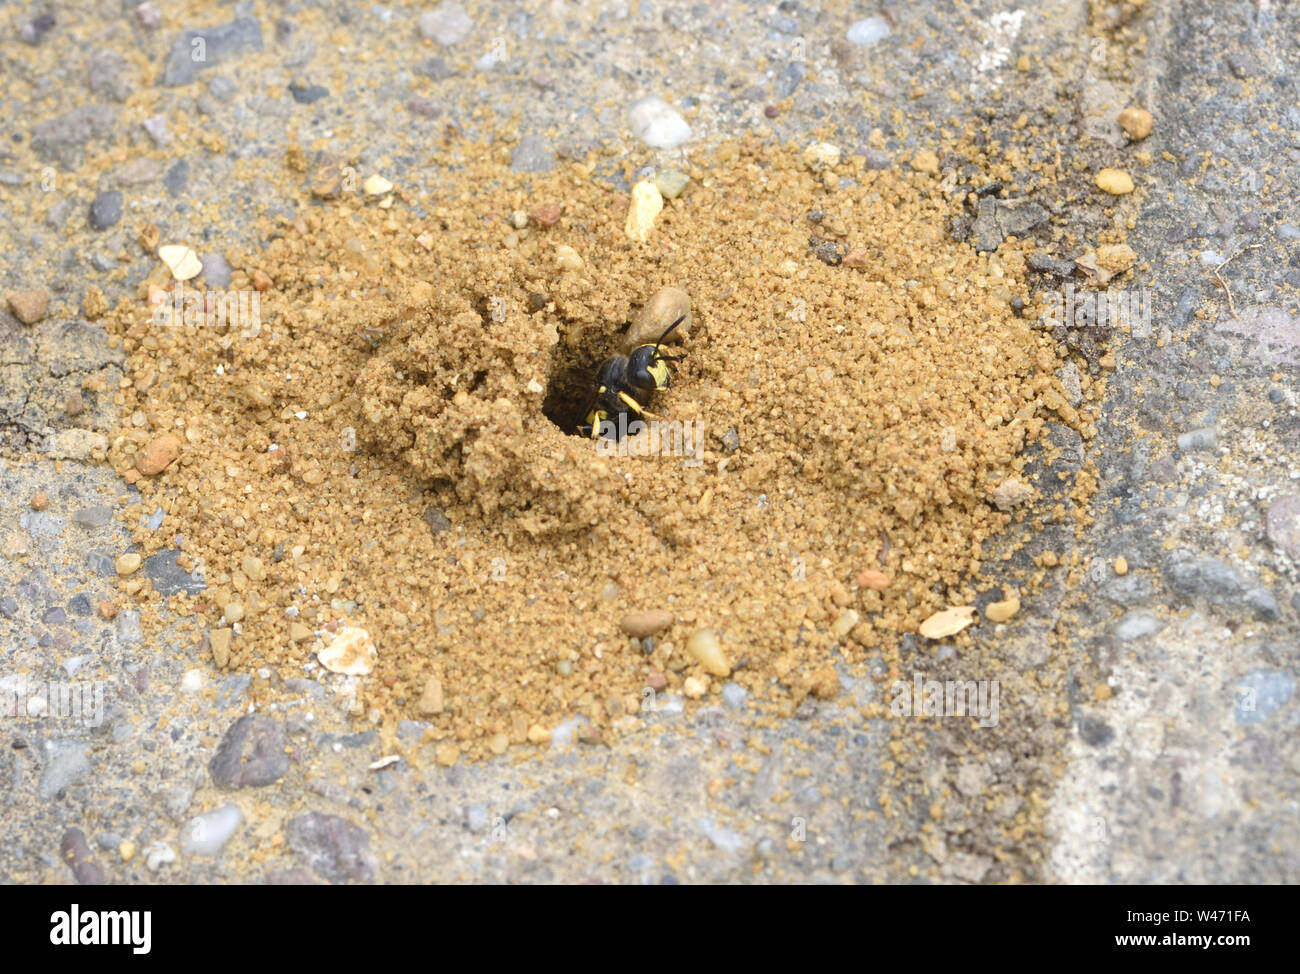 An ornate tailed digger wasp (Cerceris rybyensis) cautiously emerges from its burrow in builders’ sand between paving bricks. It is probably setting o Stock Photo